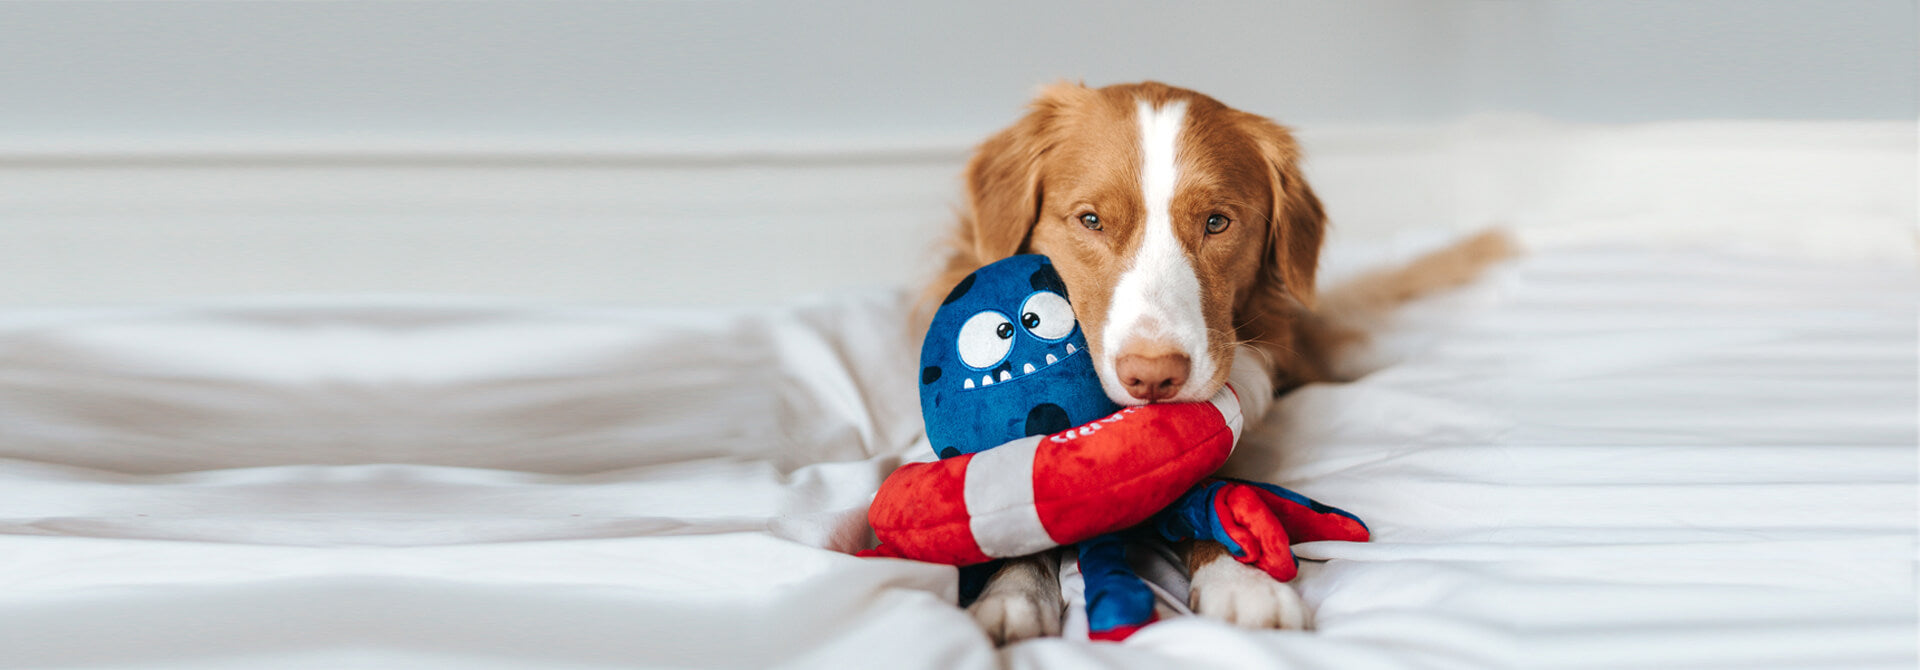 A cute toller breed dog posing with his octopus dog toy